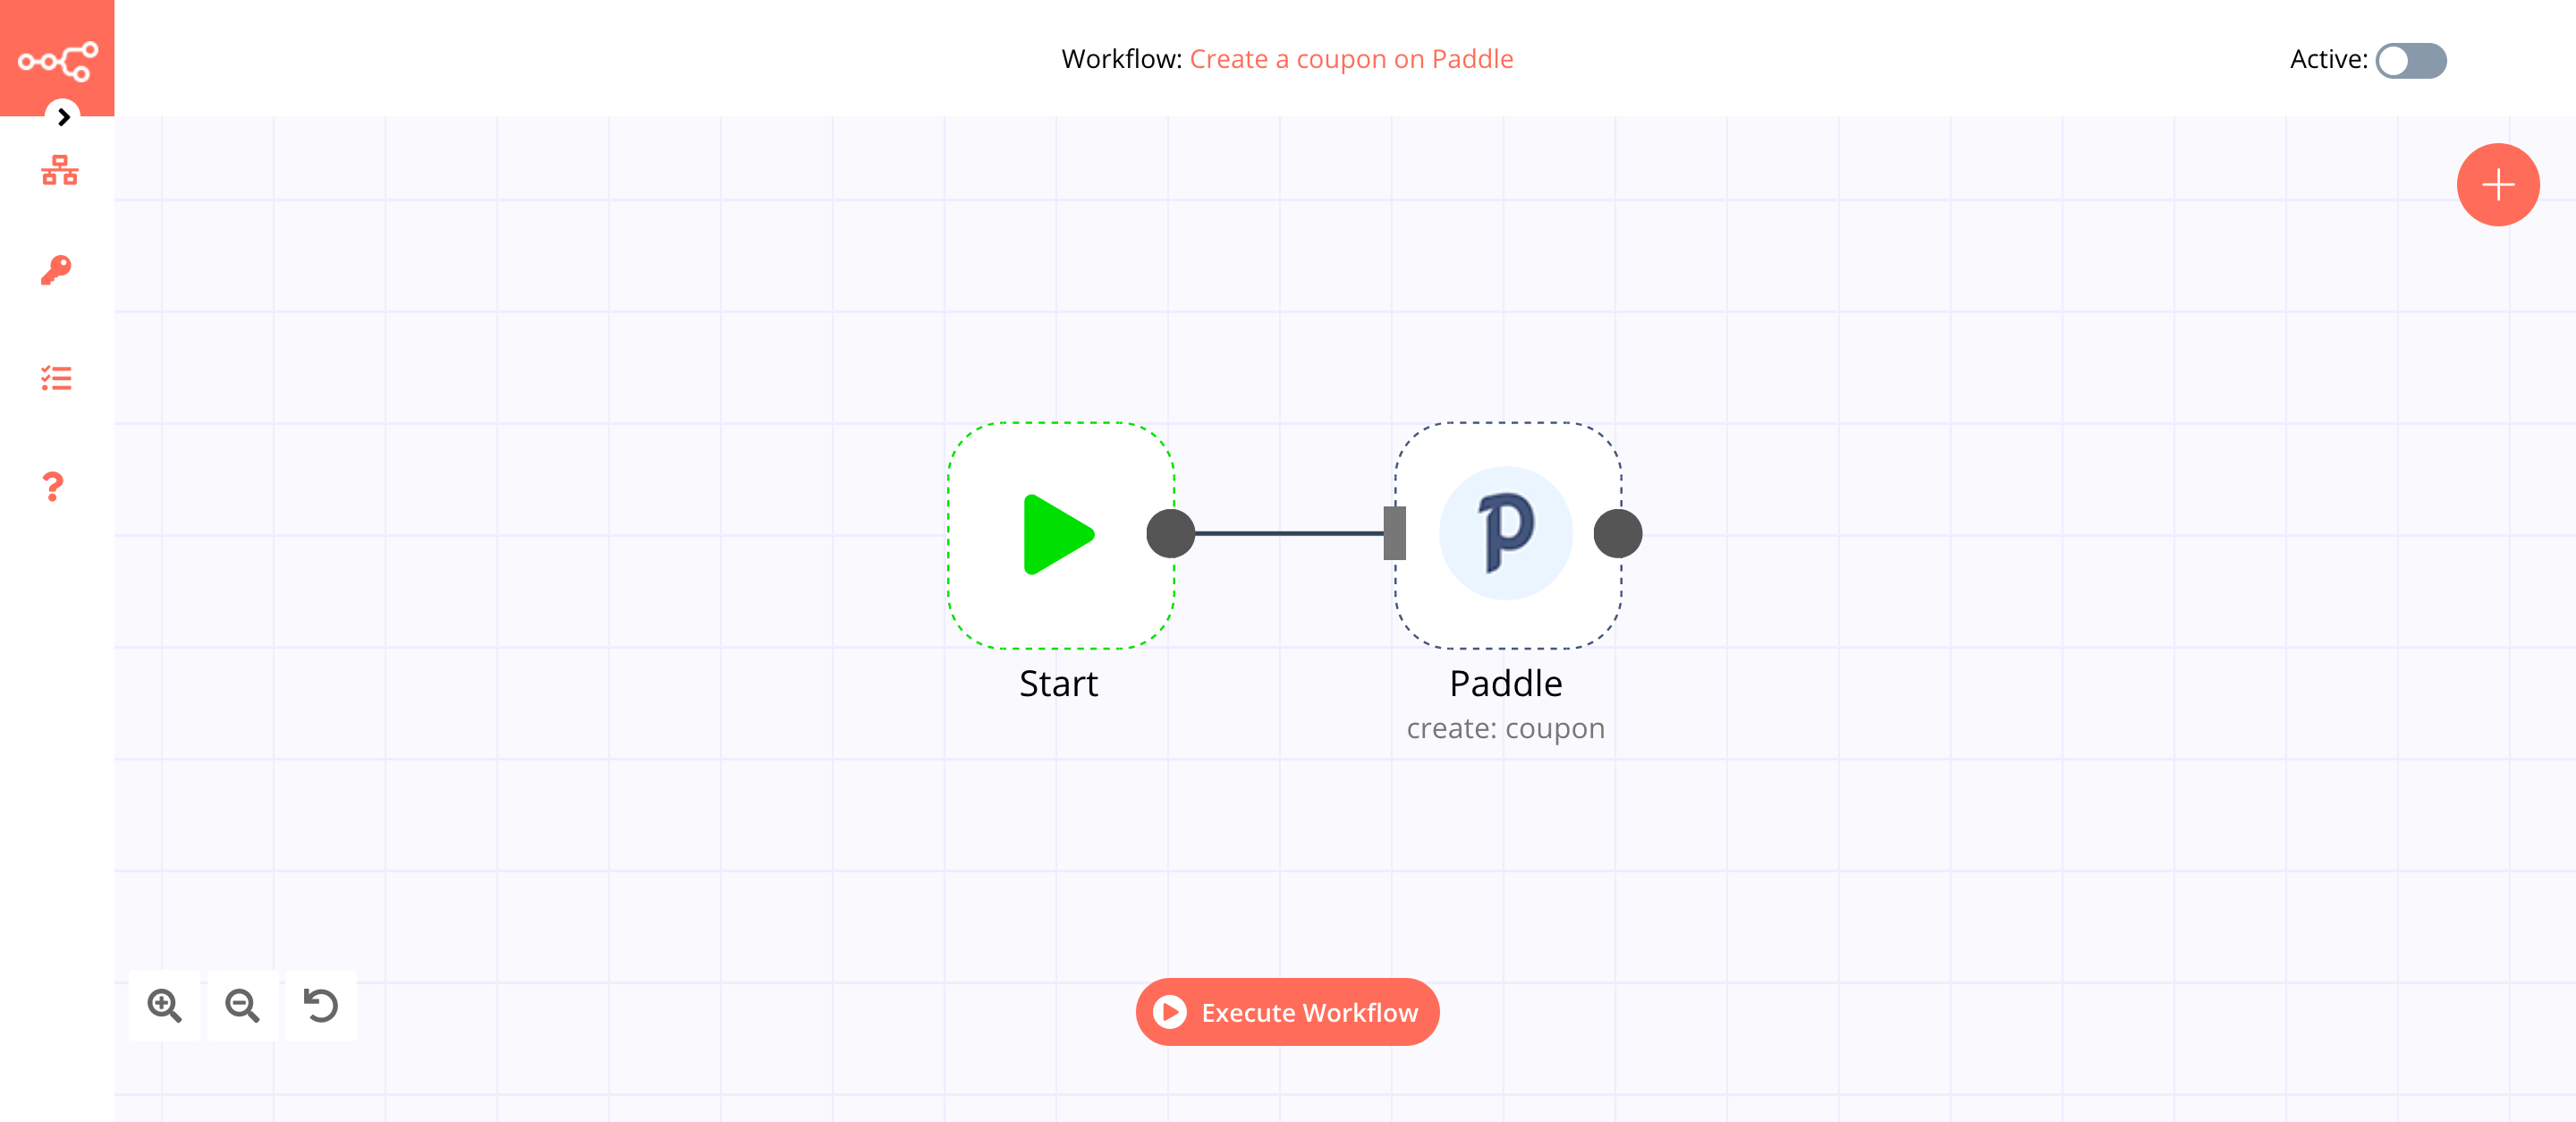 A workflow with the Paddle node